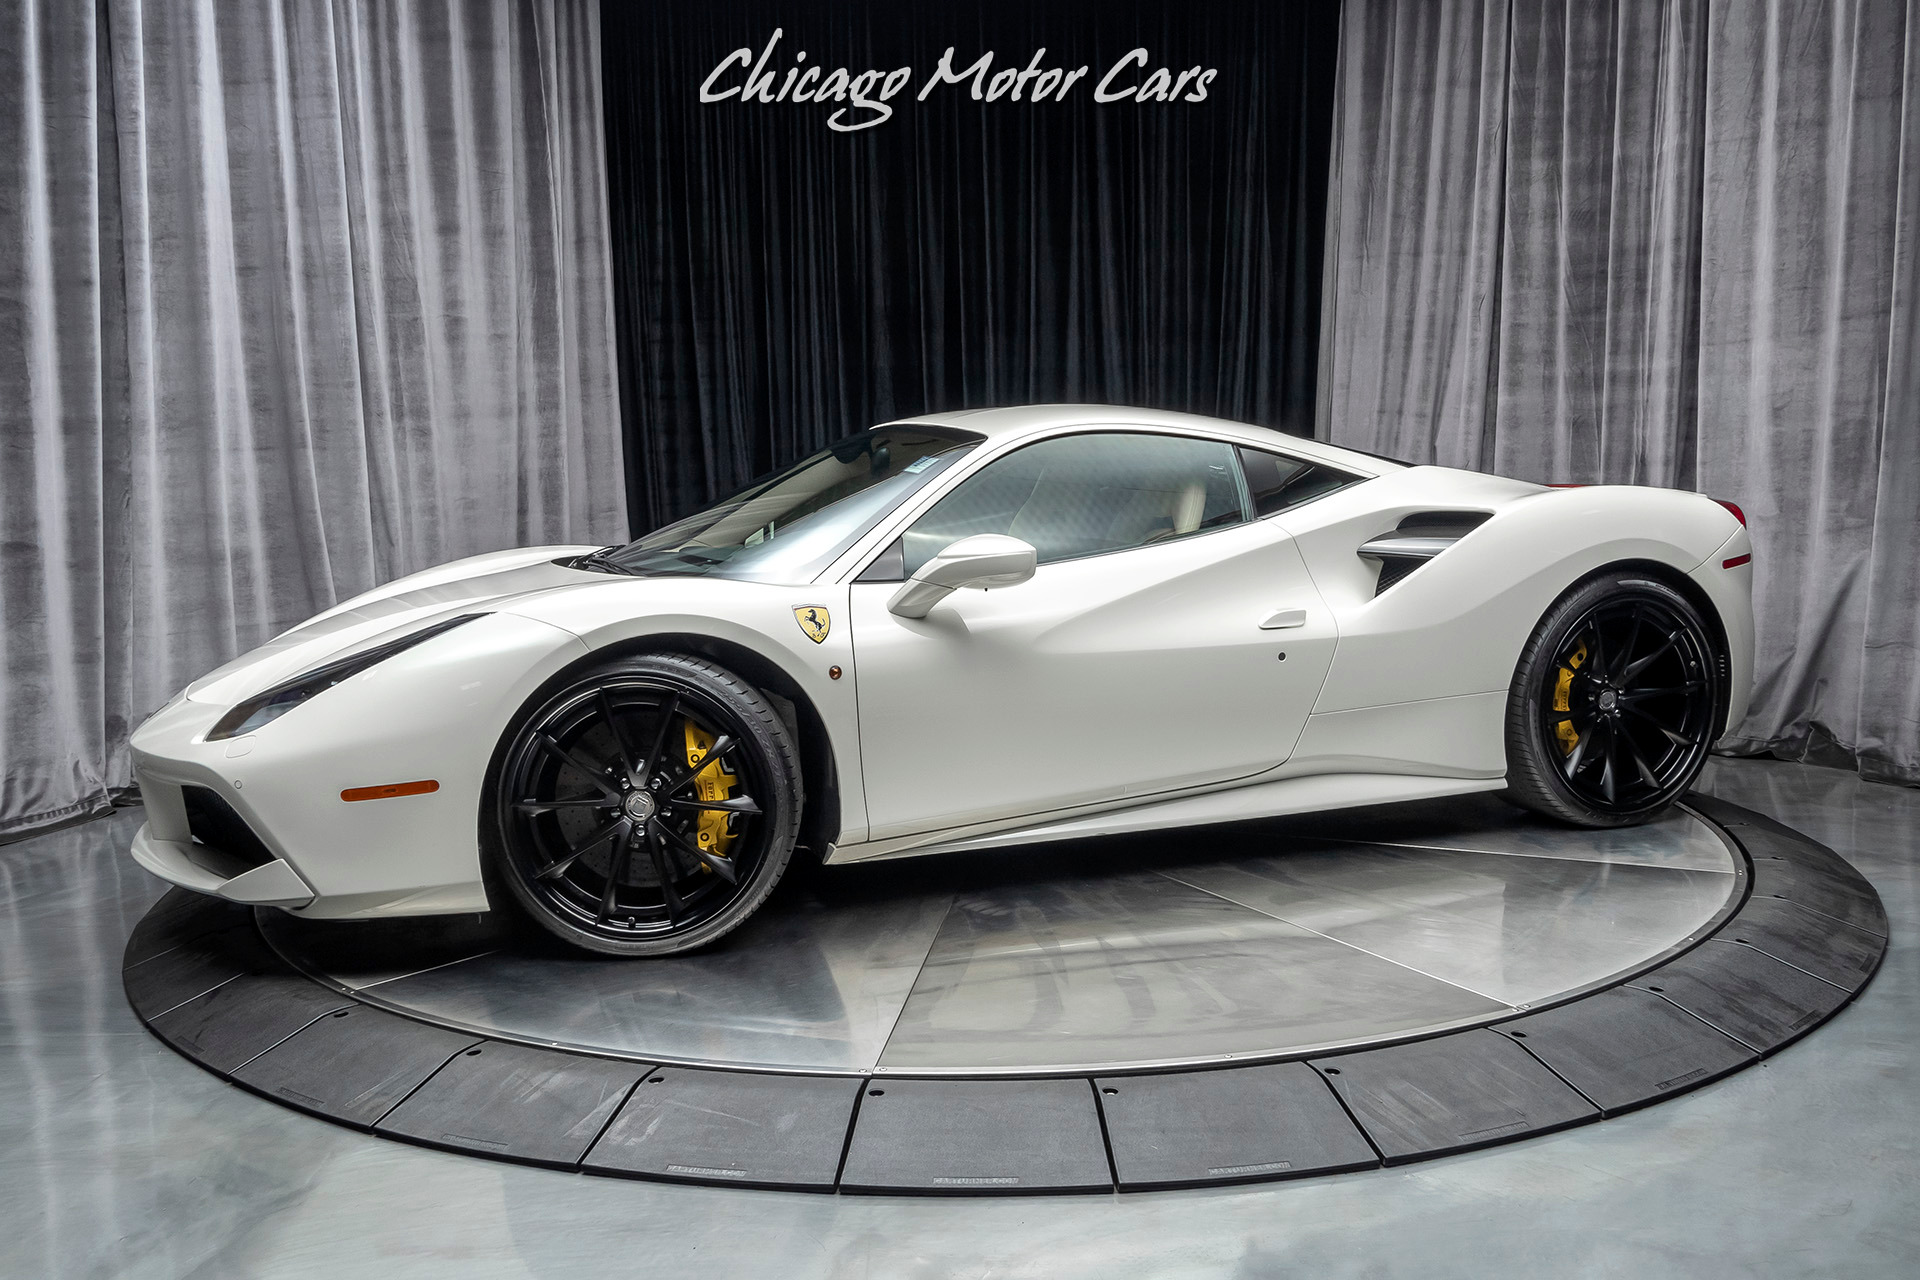 Used 2018 Ferrari 488 Gtb Coupe Msrp 320k Only 800 Miles